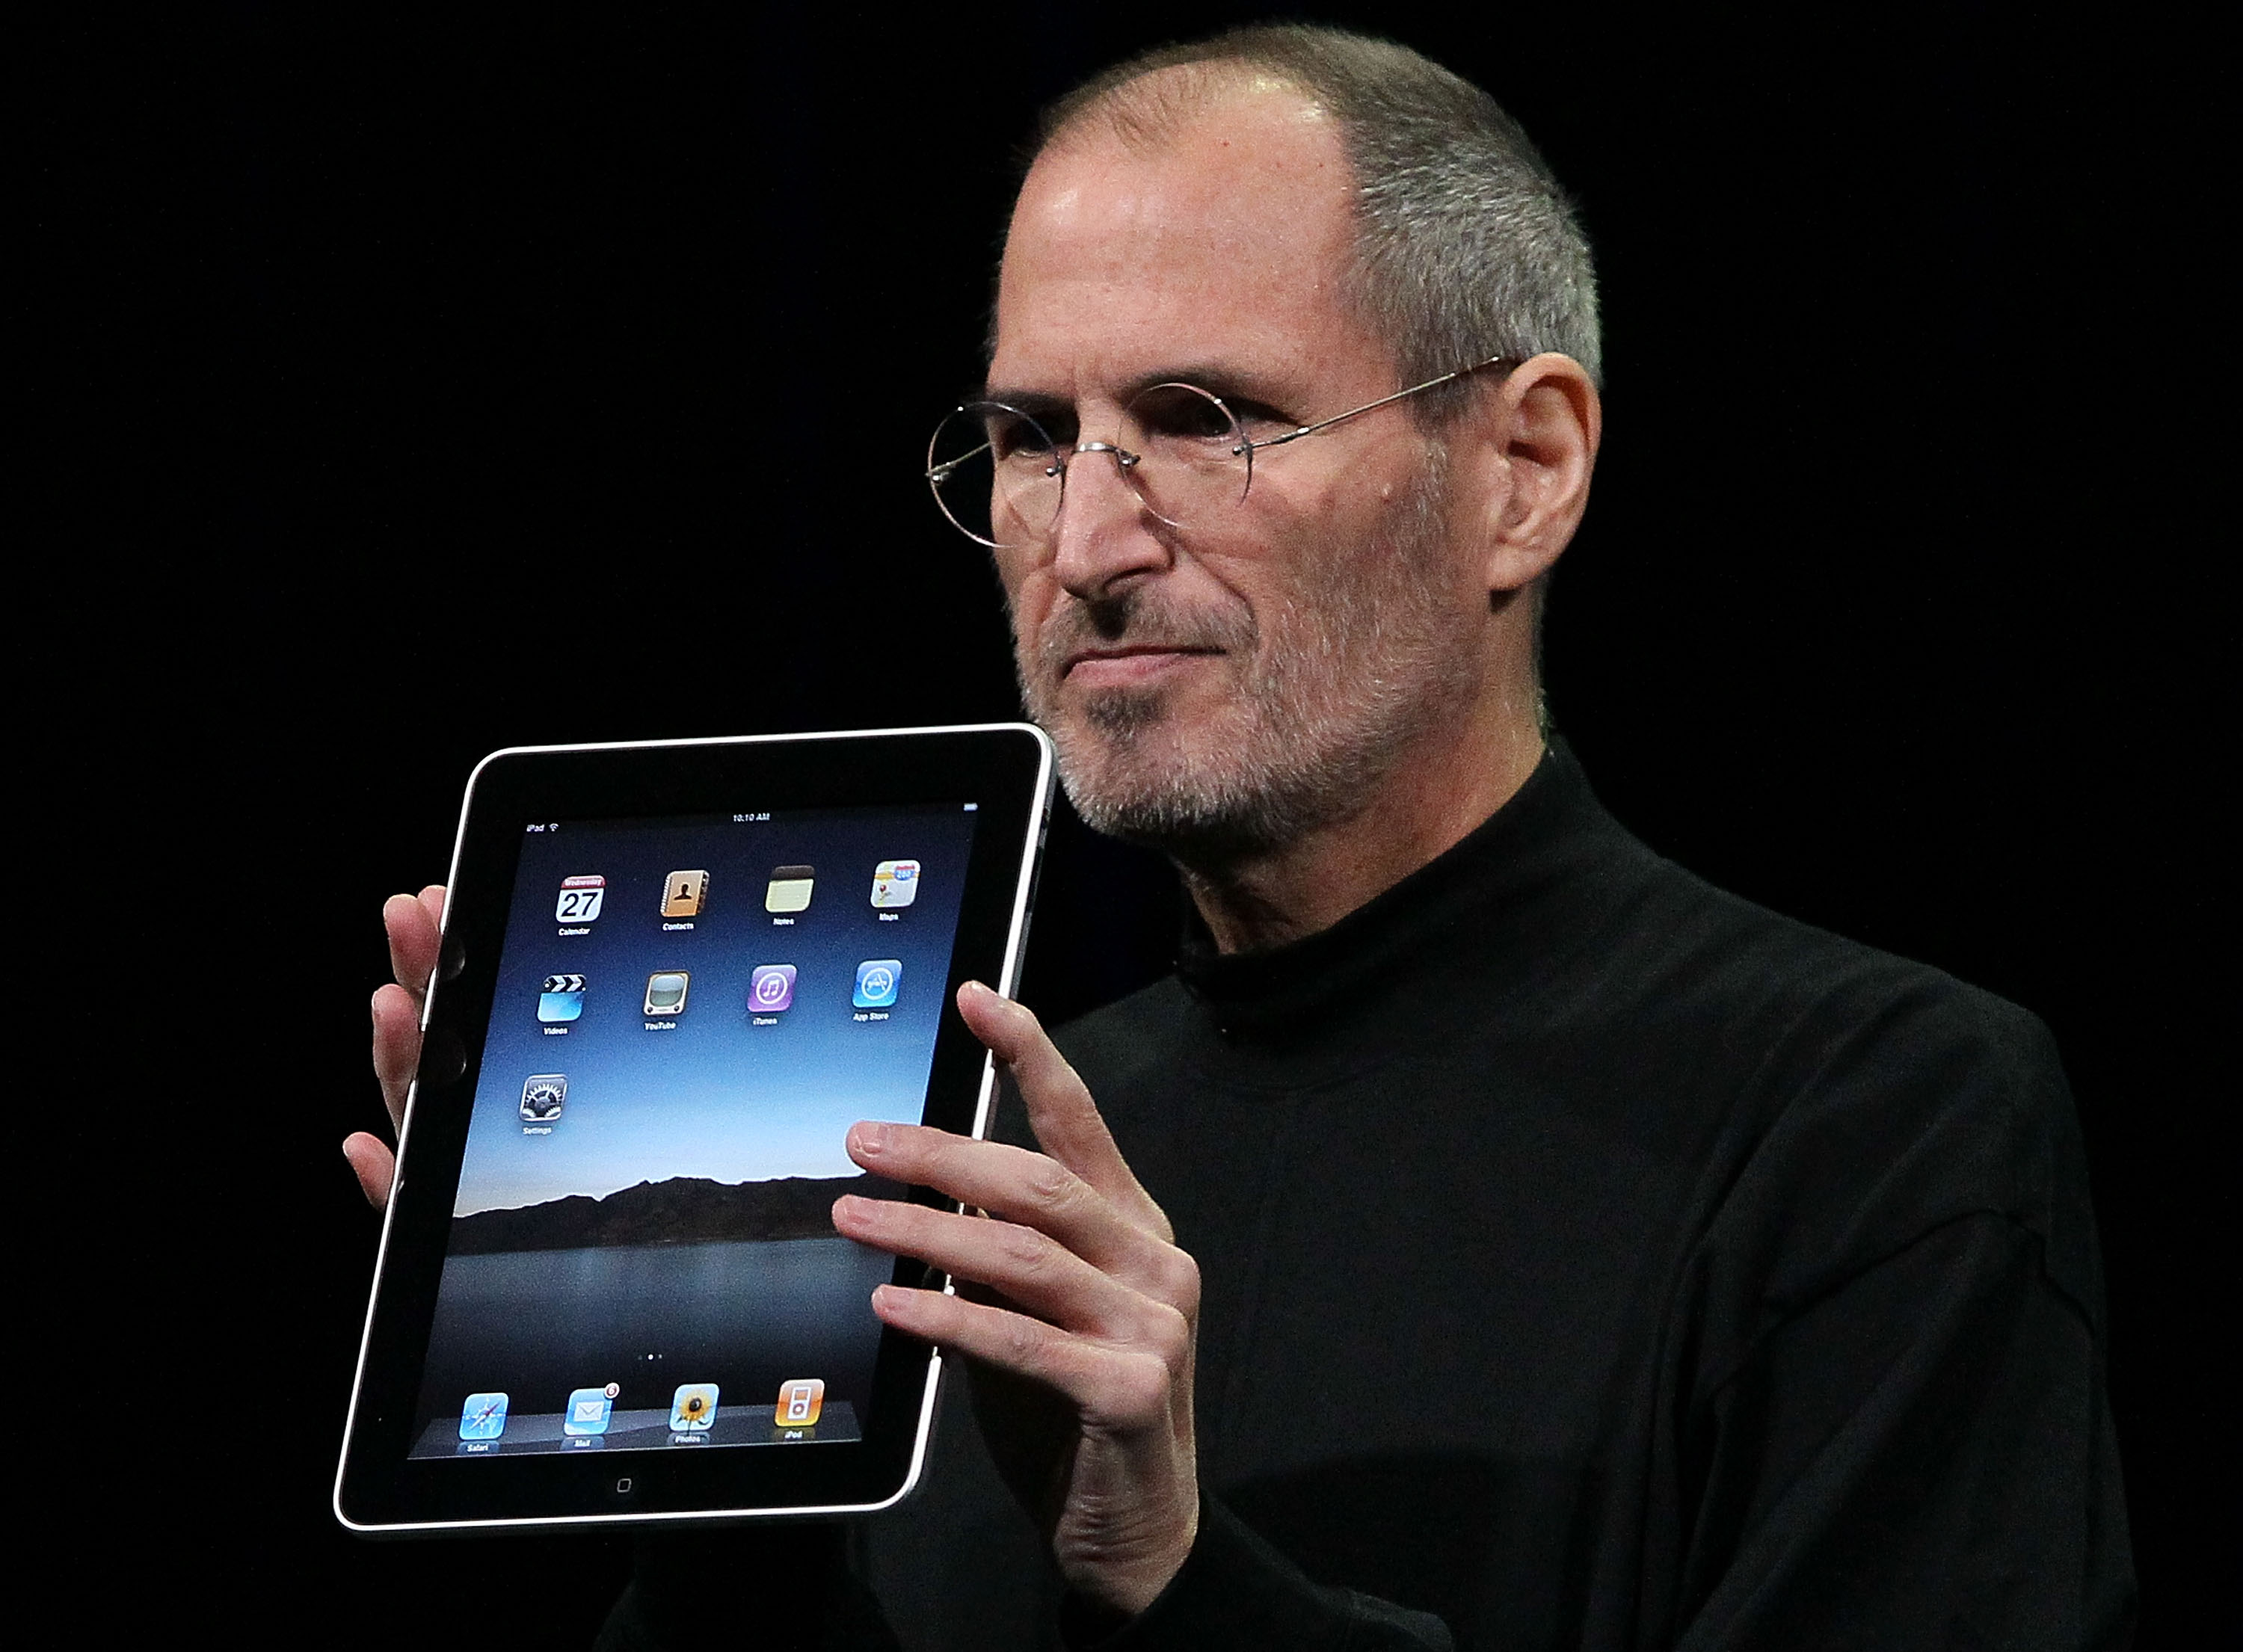 Apple Inc. CEO Steve Jobs holds up the new iPad as he speaks during an Apple Special Event at Yerba Buena Center for the Arts Jan. 27, 2010 in San Francisco, California. (Justin Sullivan&mdash;Getty Images)